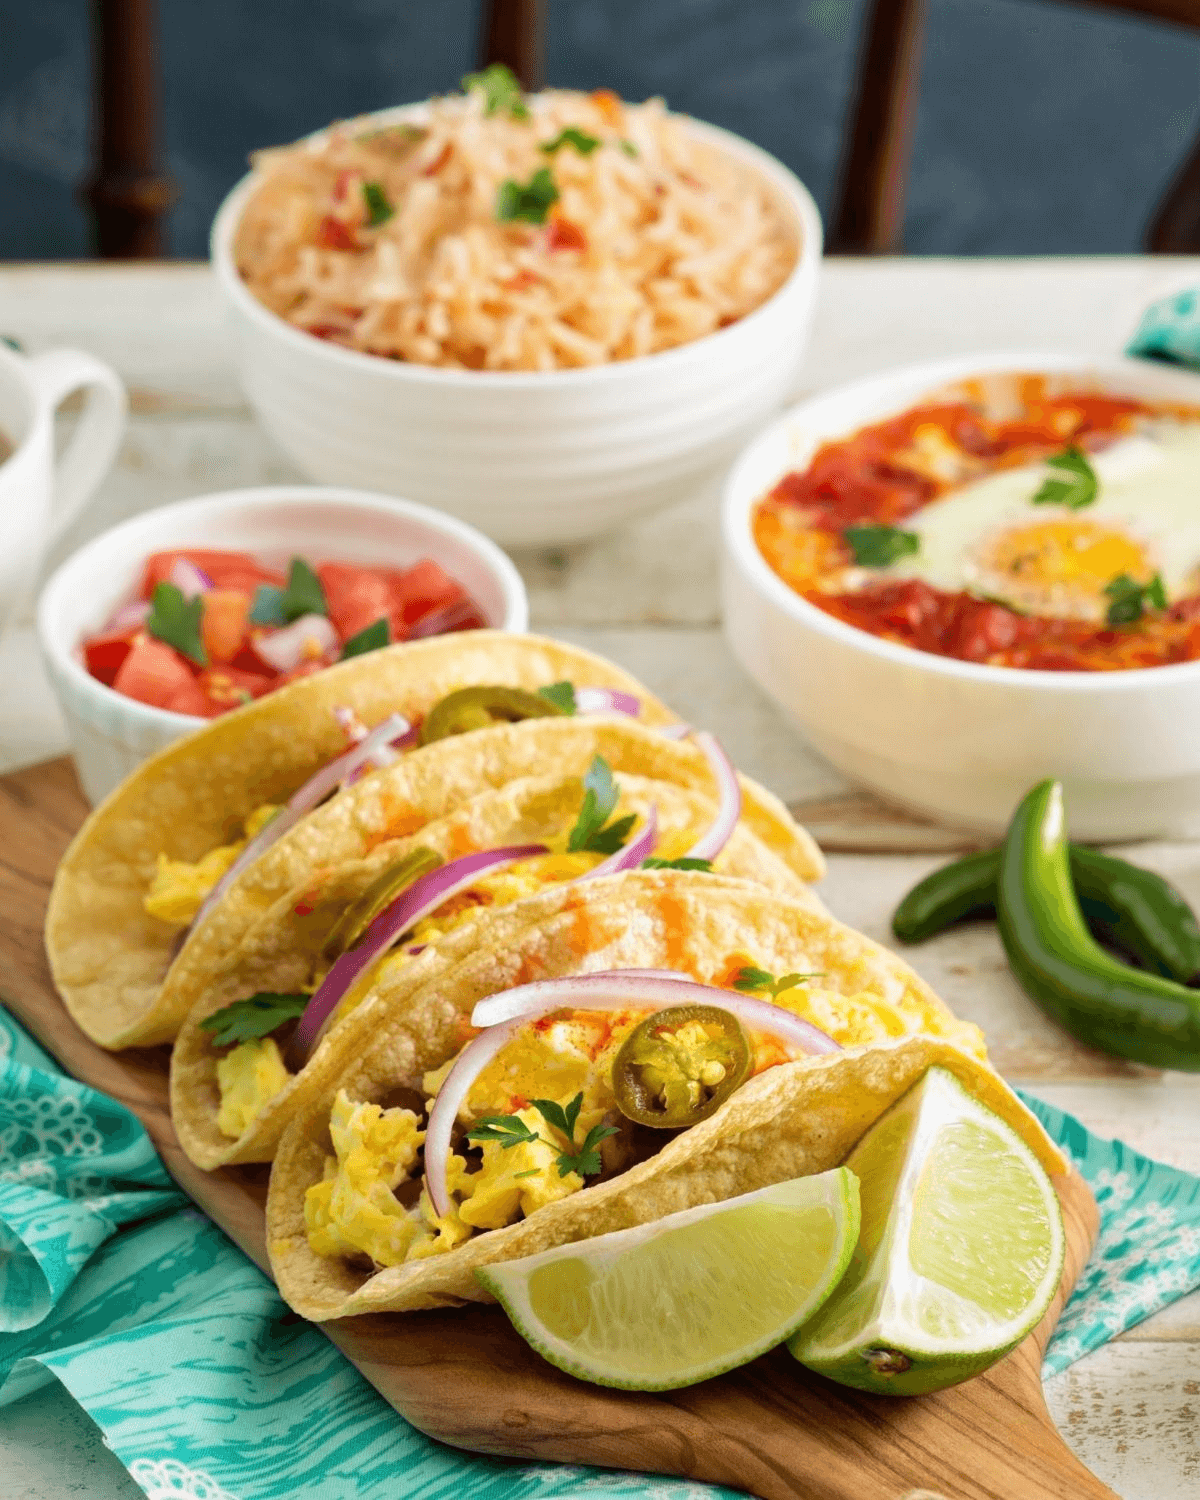 Three breakfast tacos with scrambled eggs, sausage, and avocado slices, garnished with lime wedges, served next to bowls of salsa and cheesy dip.